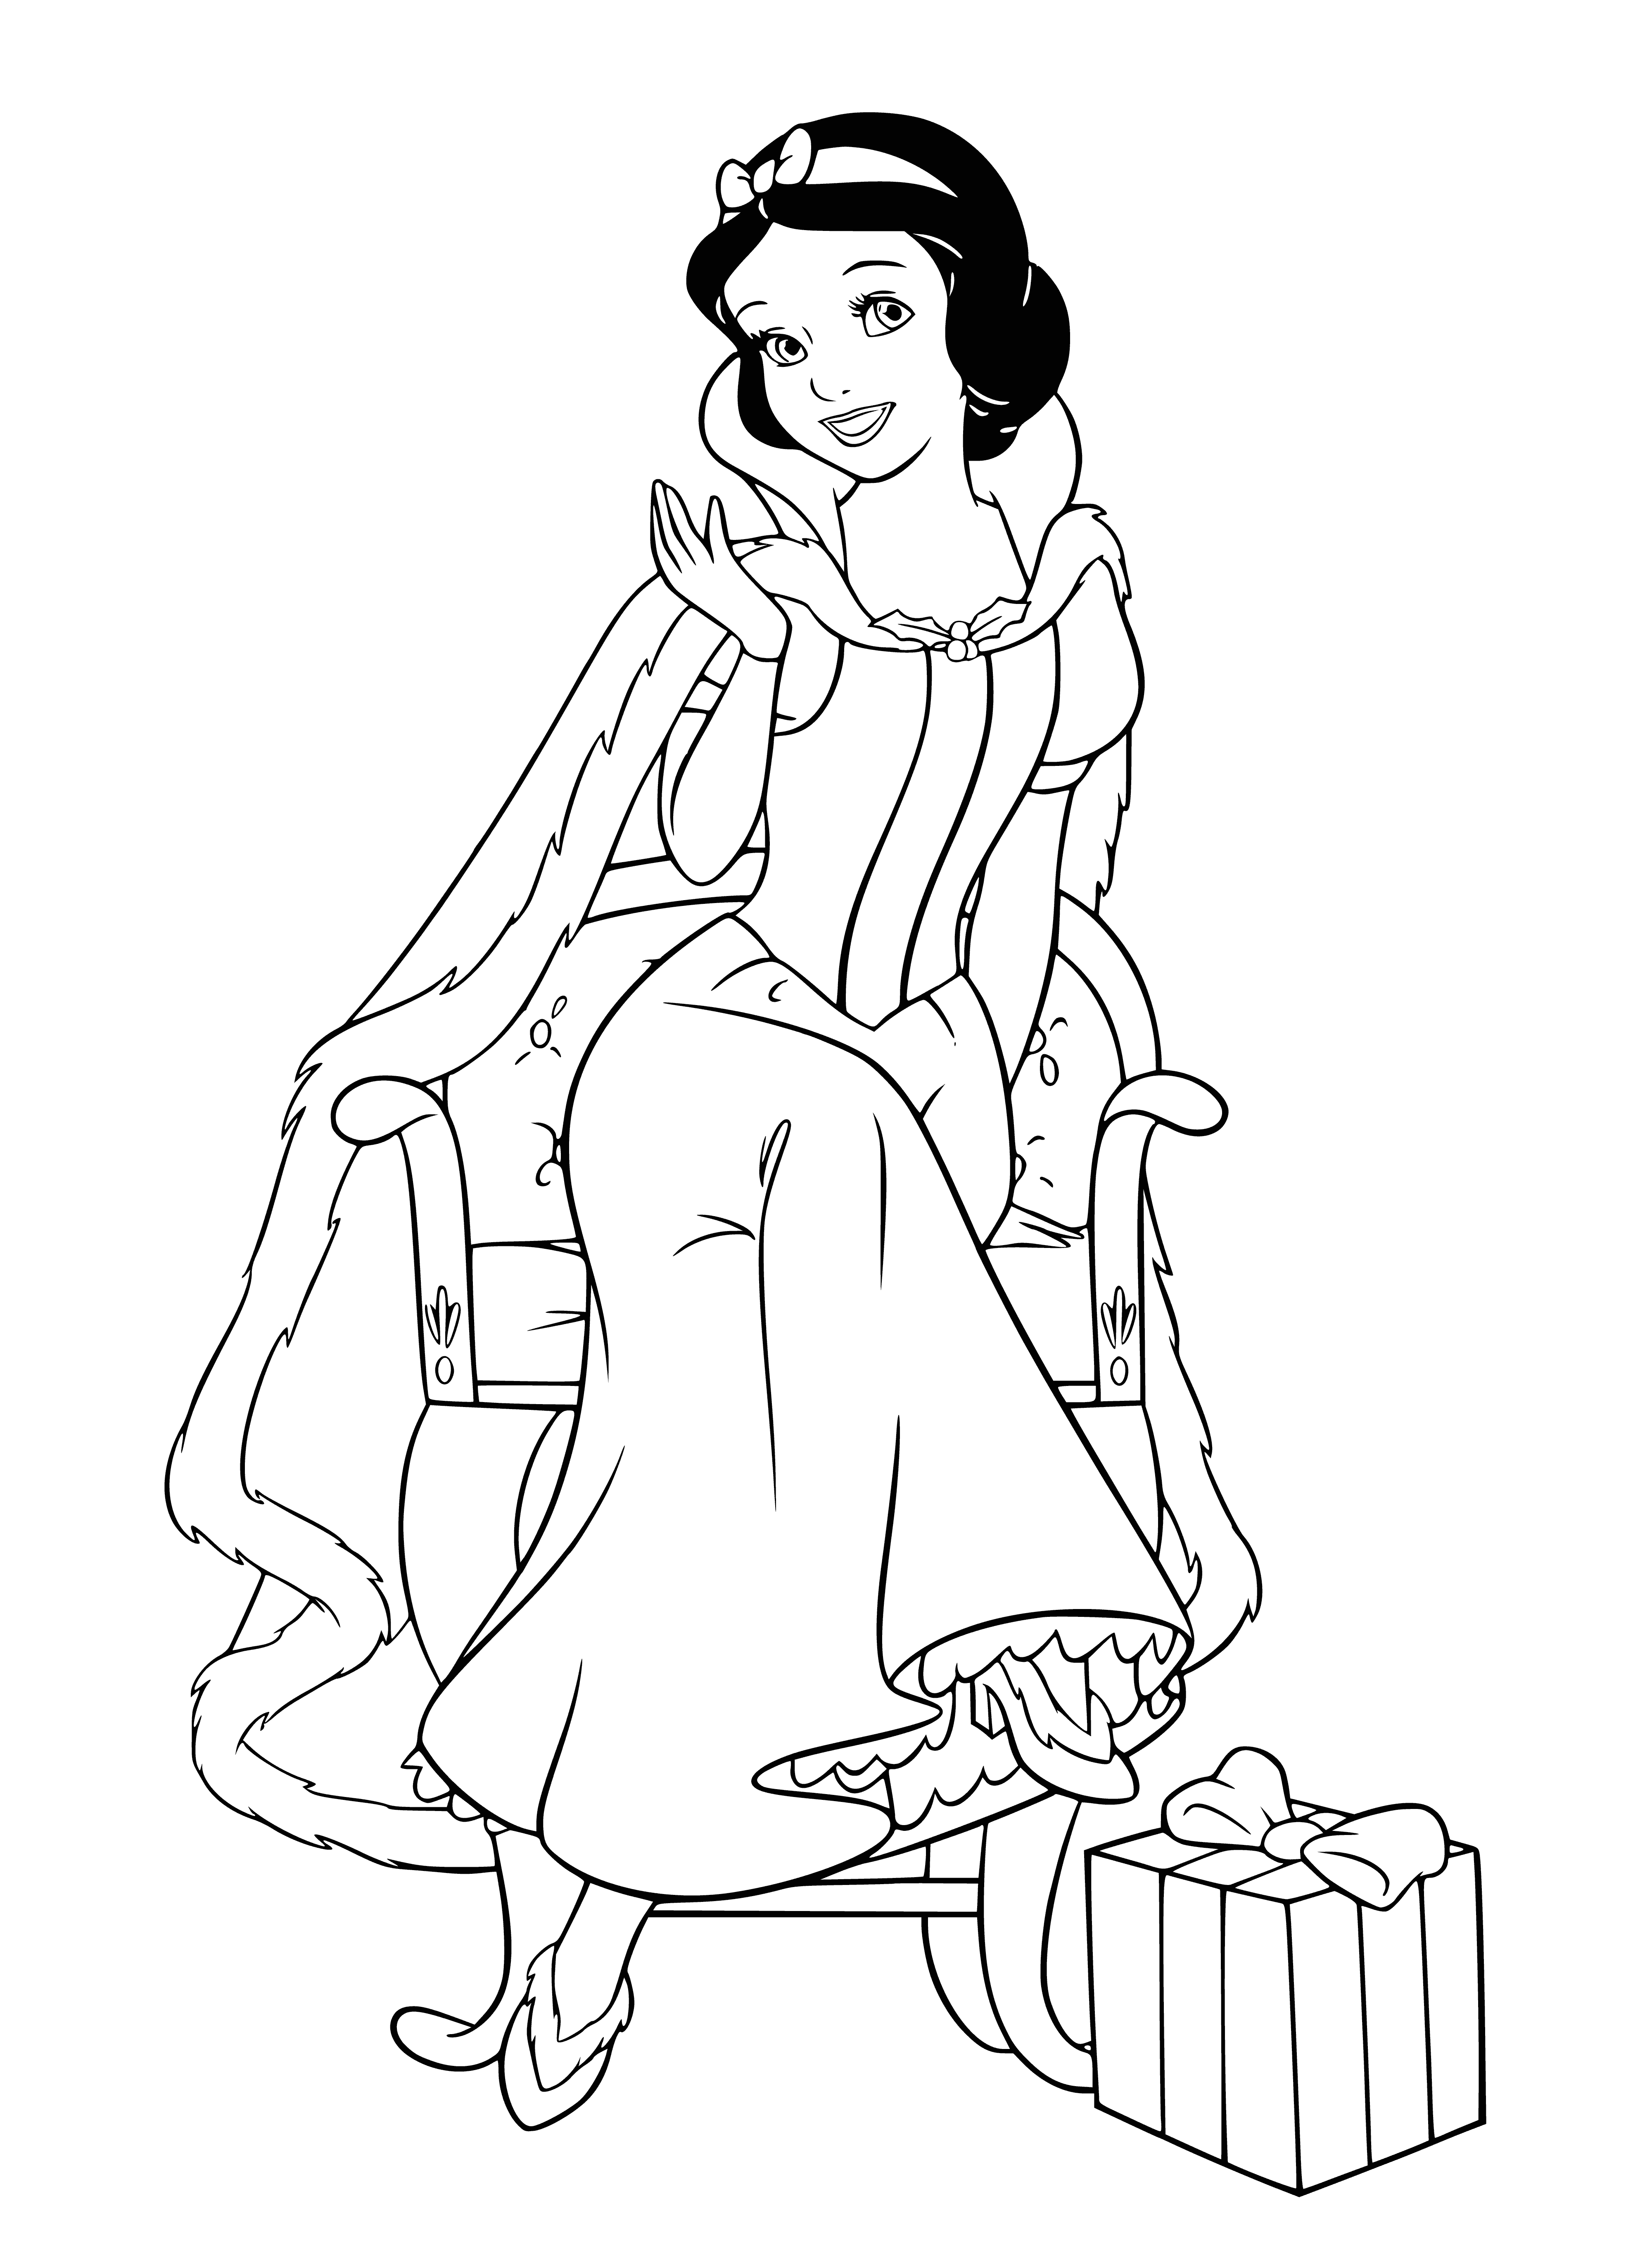 coloring page: Snow White and the Disney princesses celebrate the New Year; Snow White holds a gift and a "Happy New Year" banner behind her. #disneyprincesses